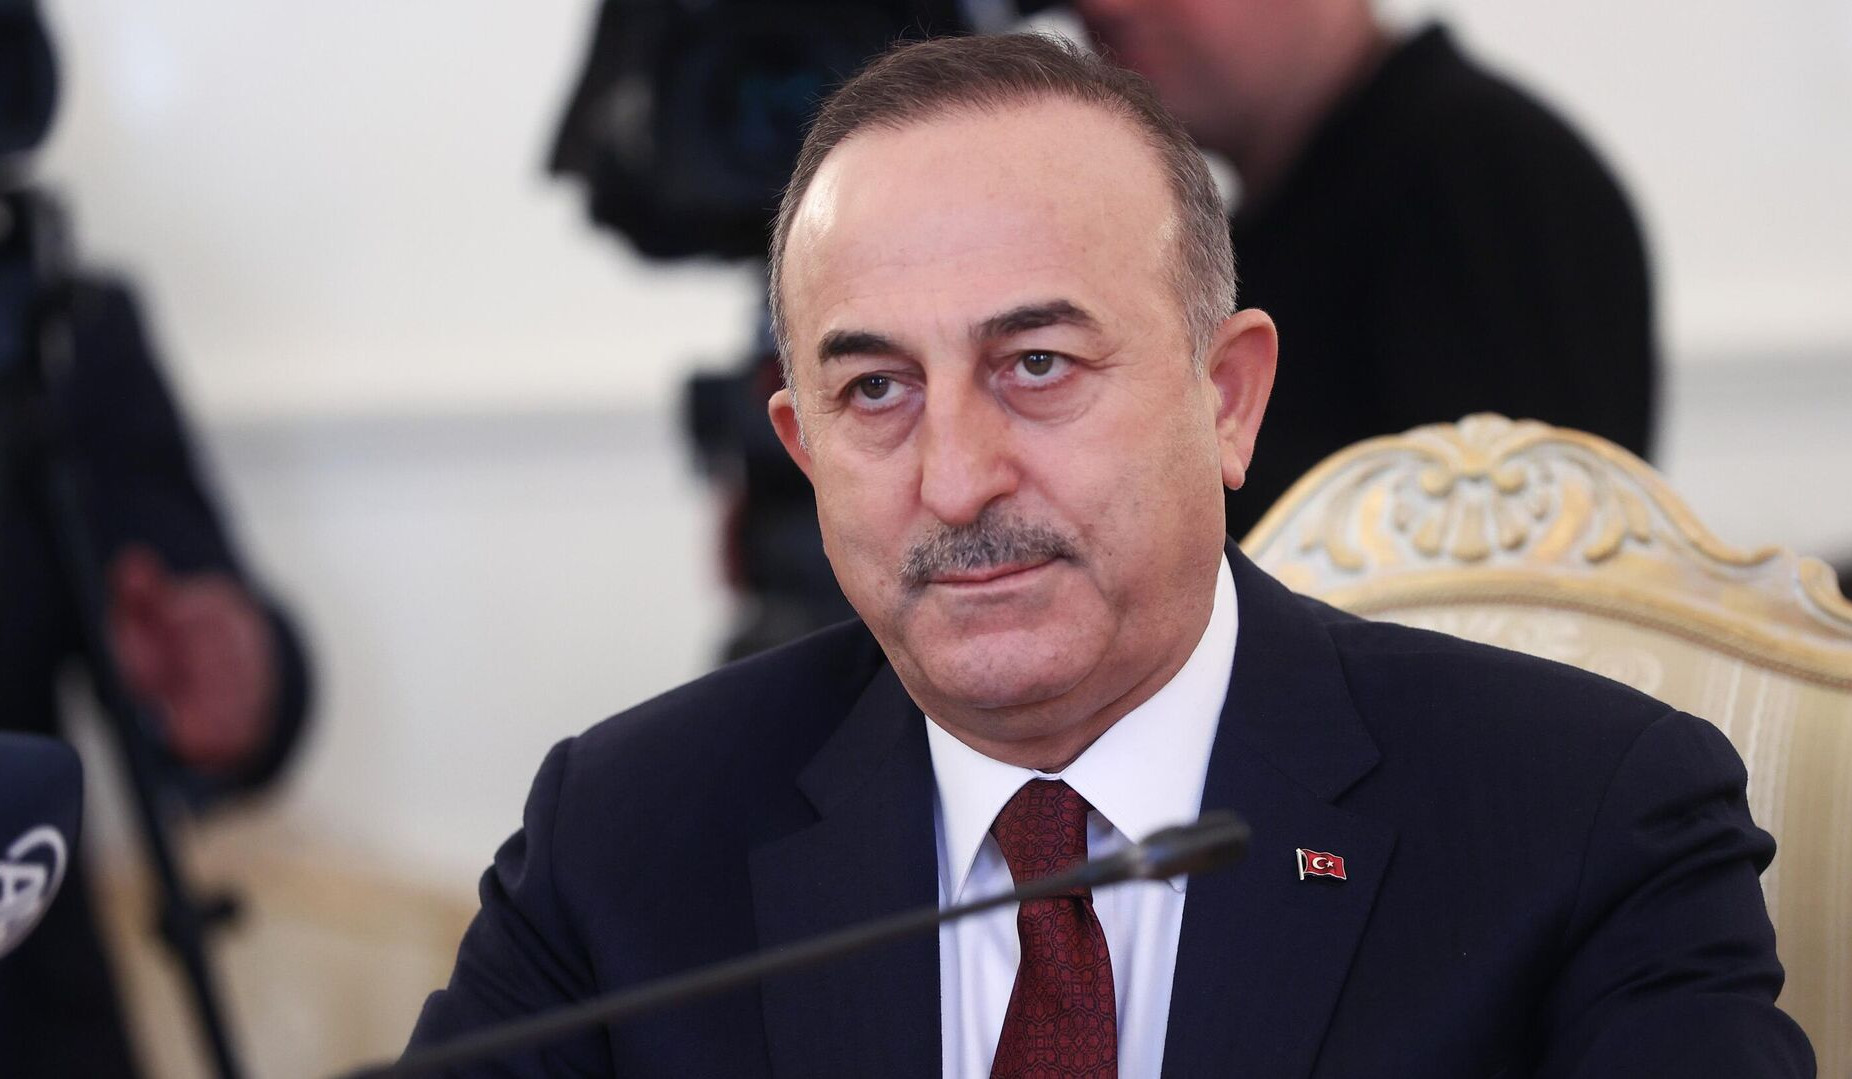 Çavuşoğlu reminded Swedish Foreign Minister of condition of NATO membership